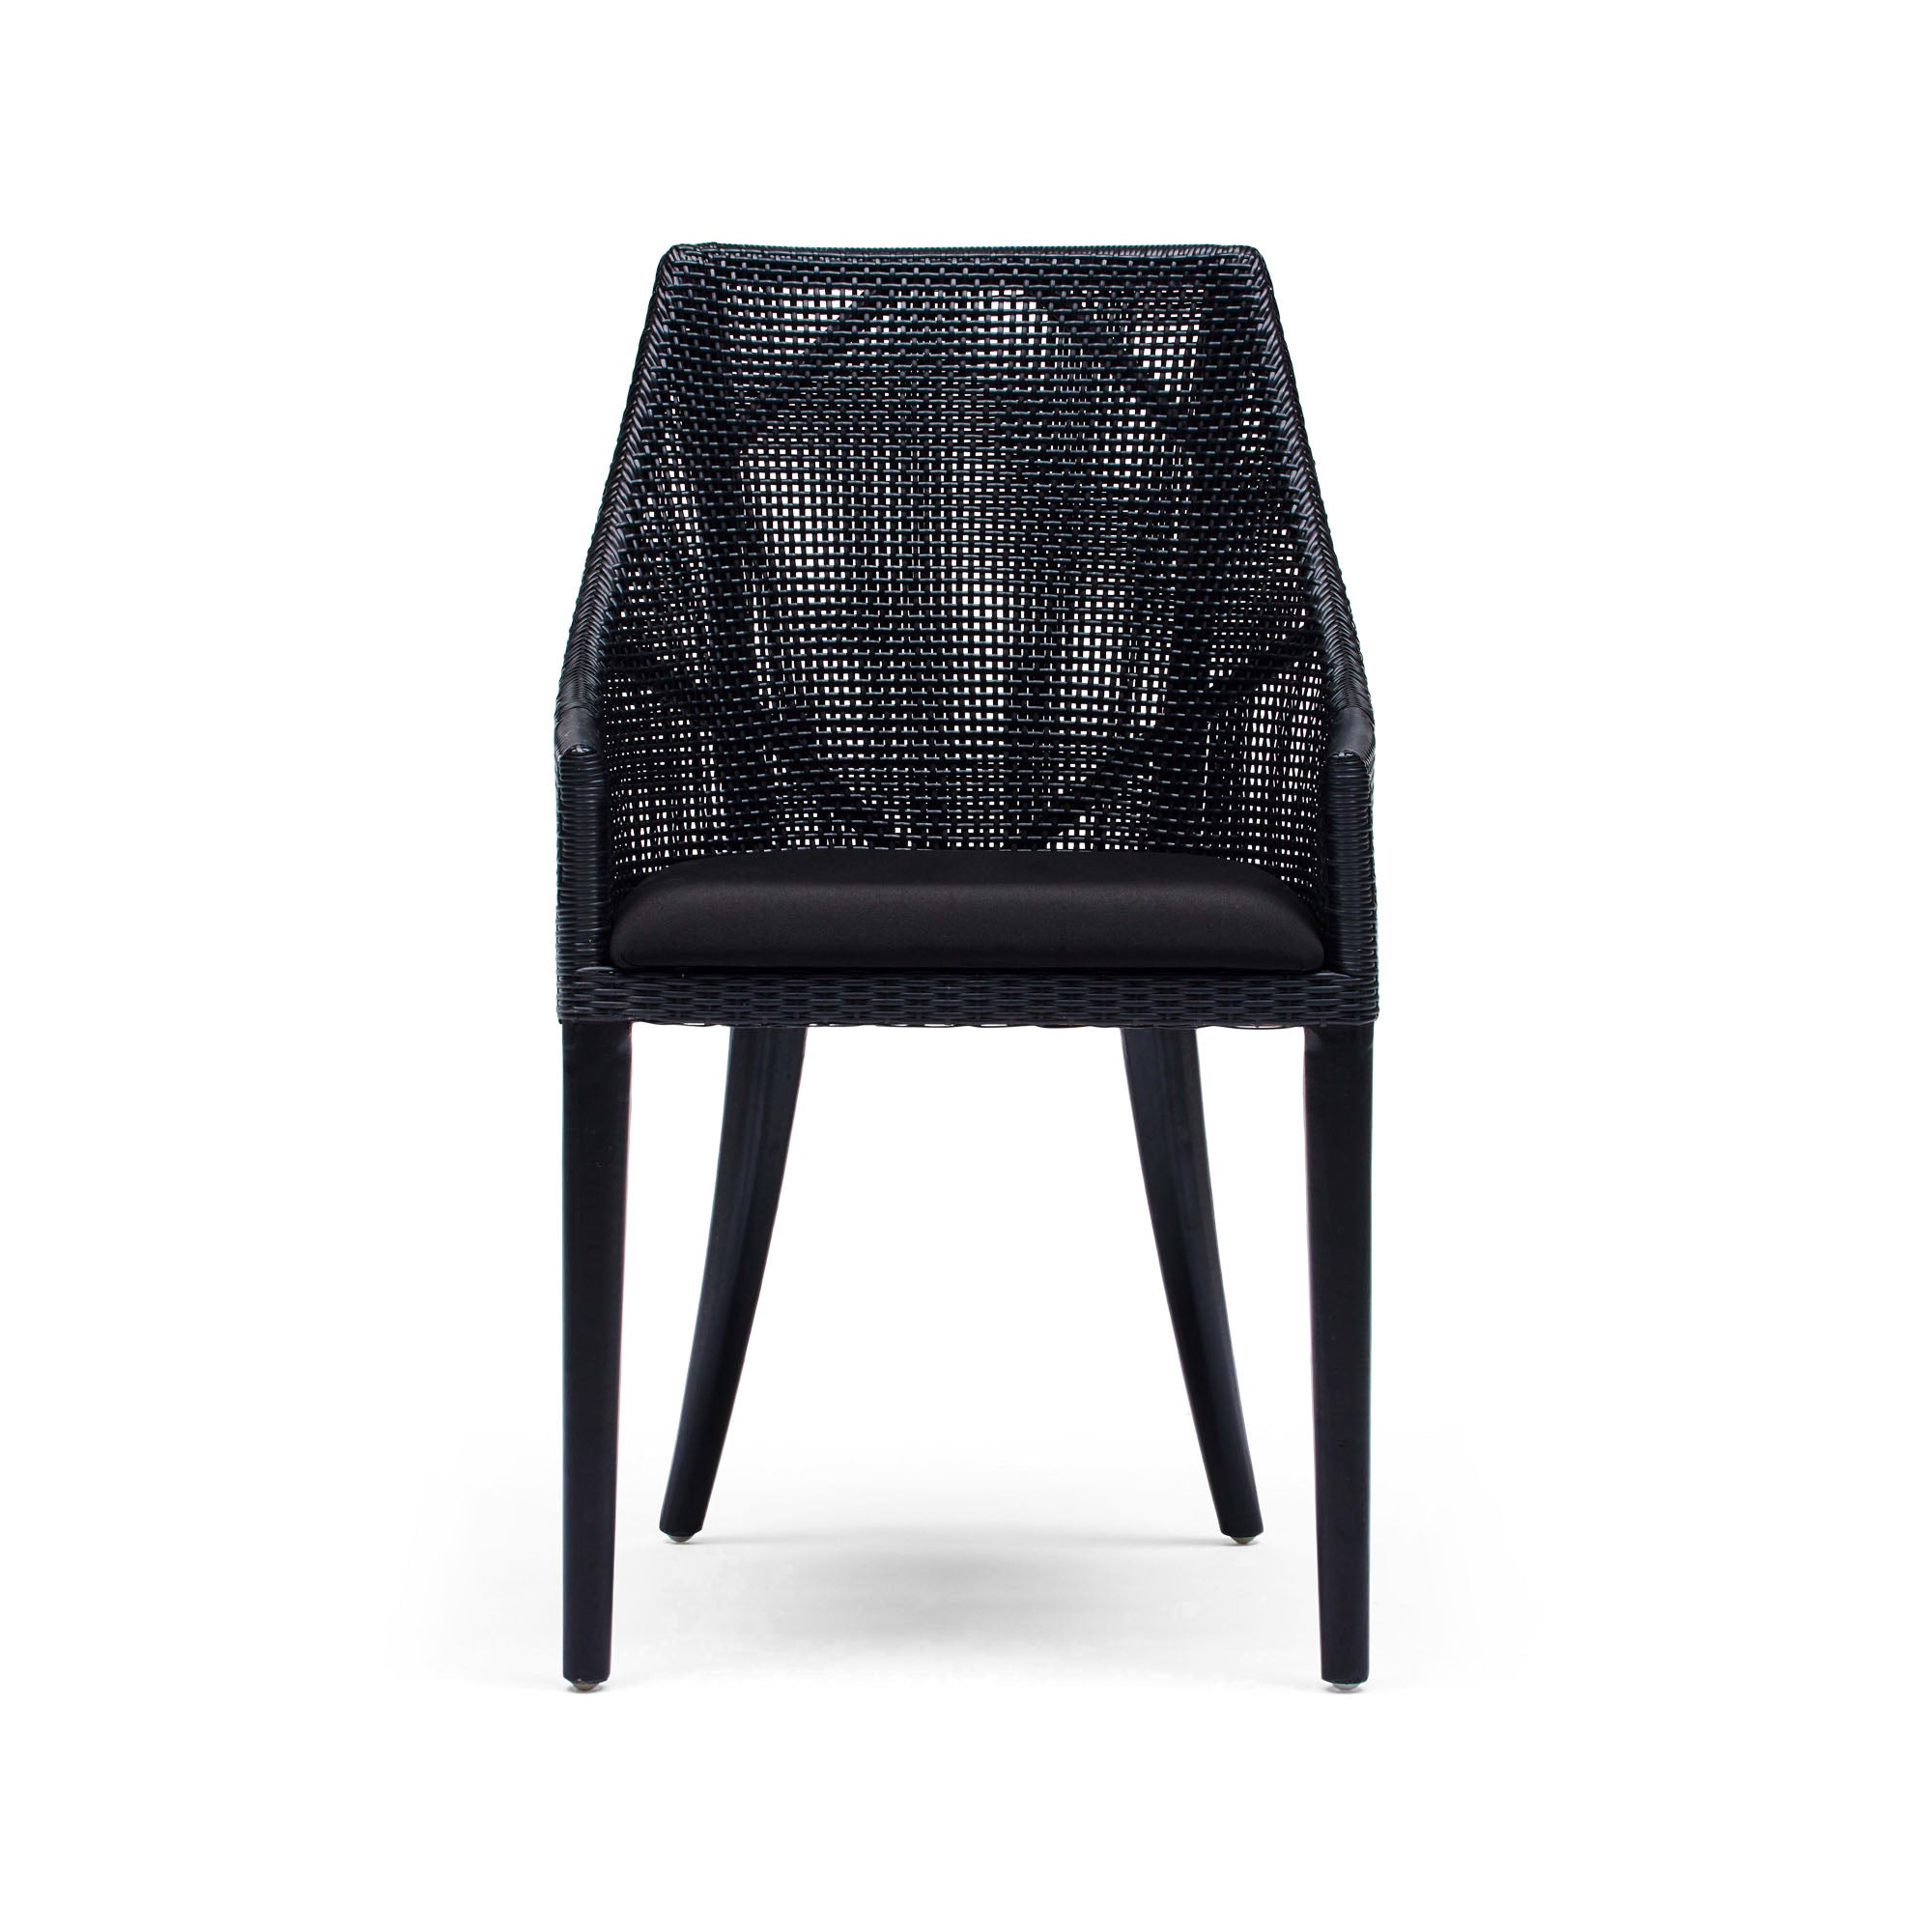 Remi Outdoor Dining Chair Black